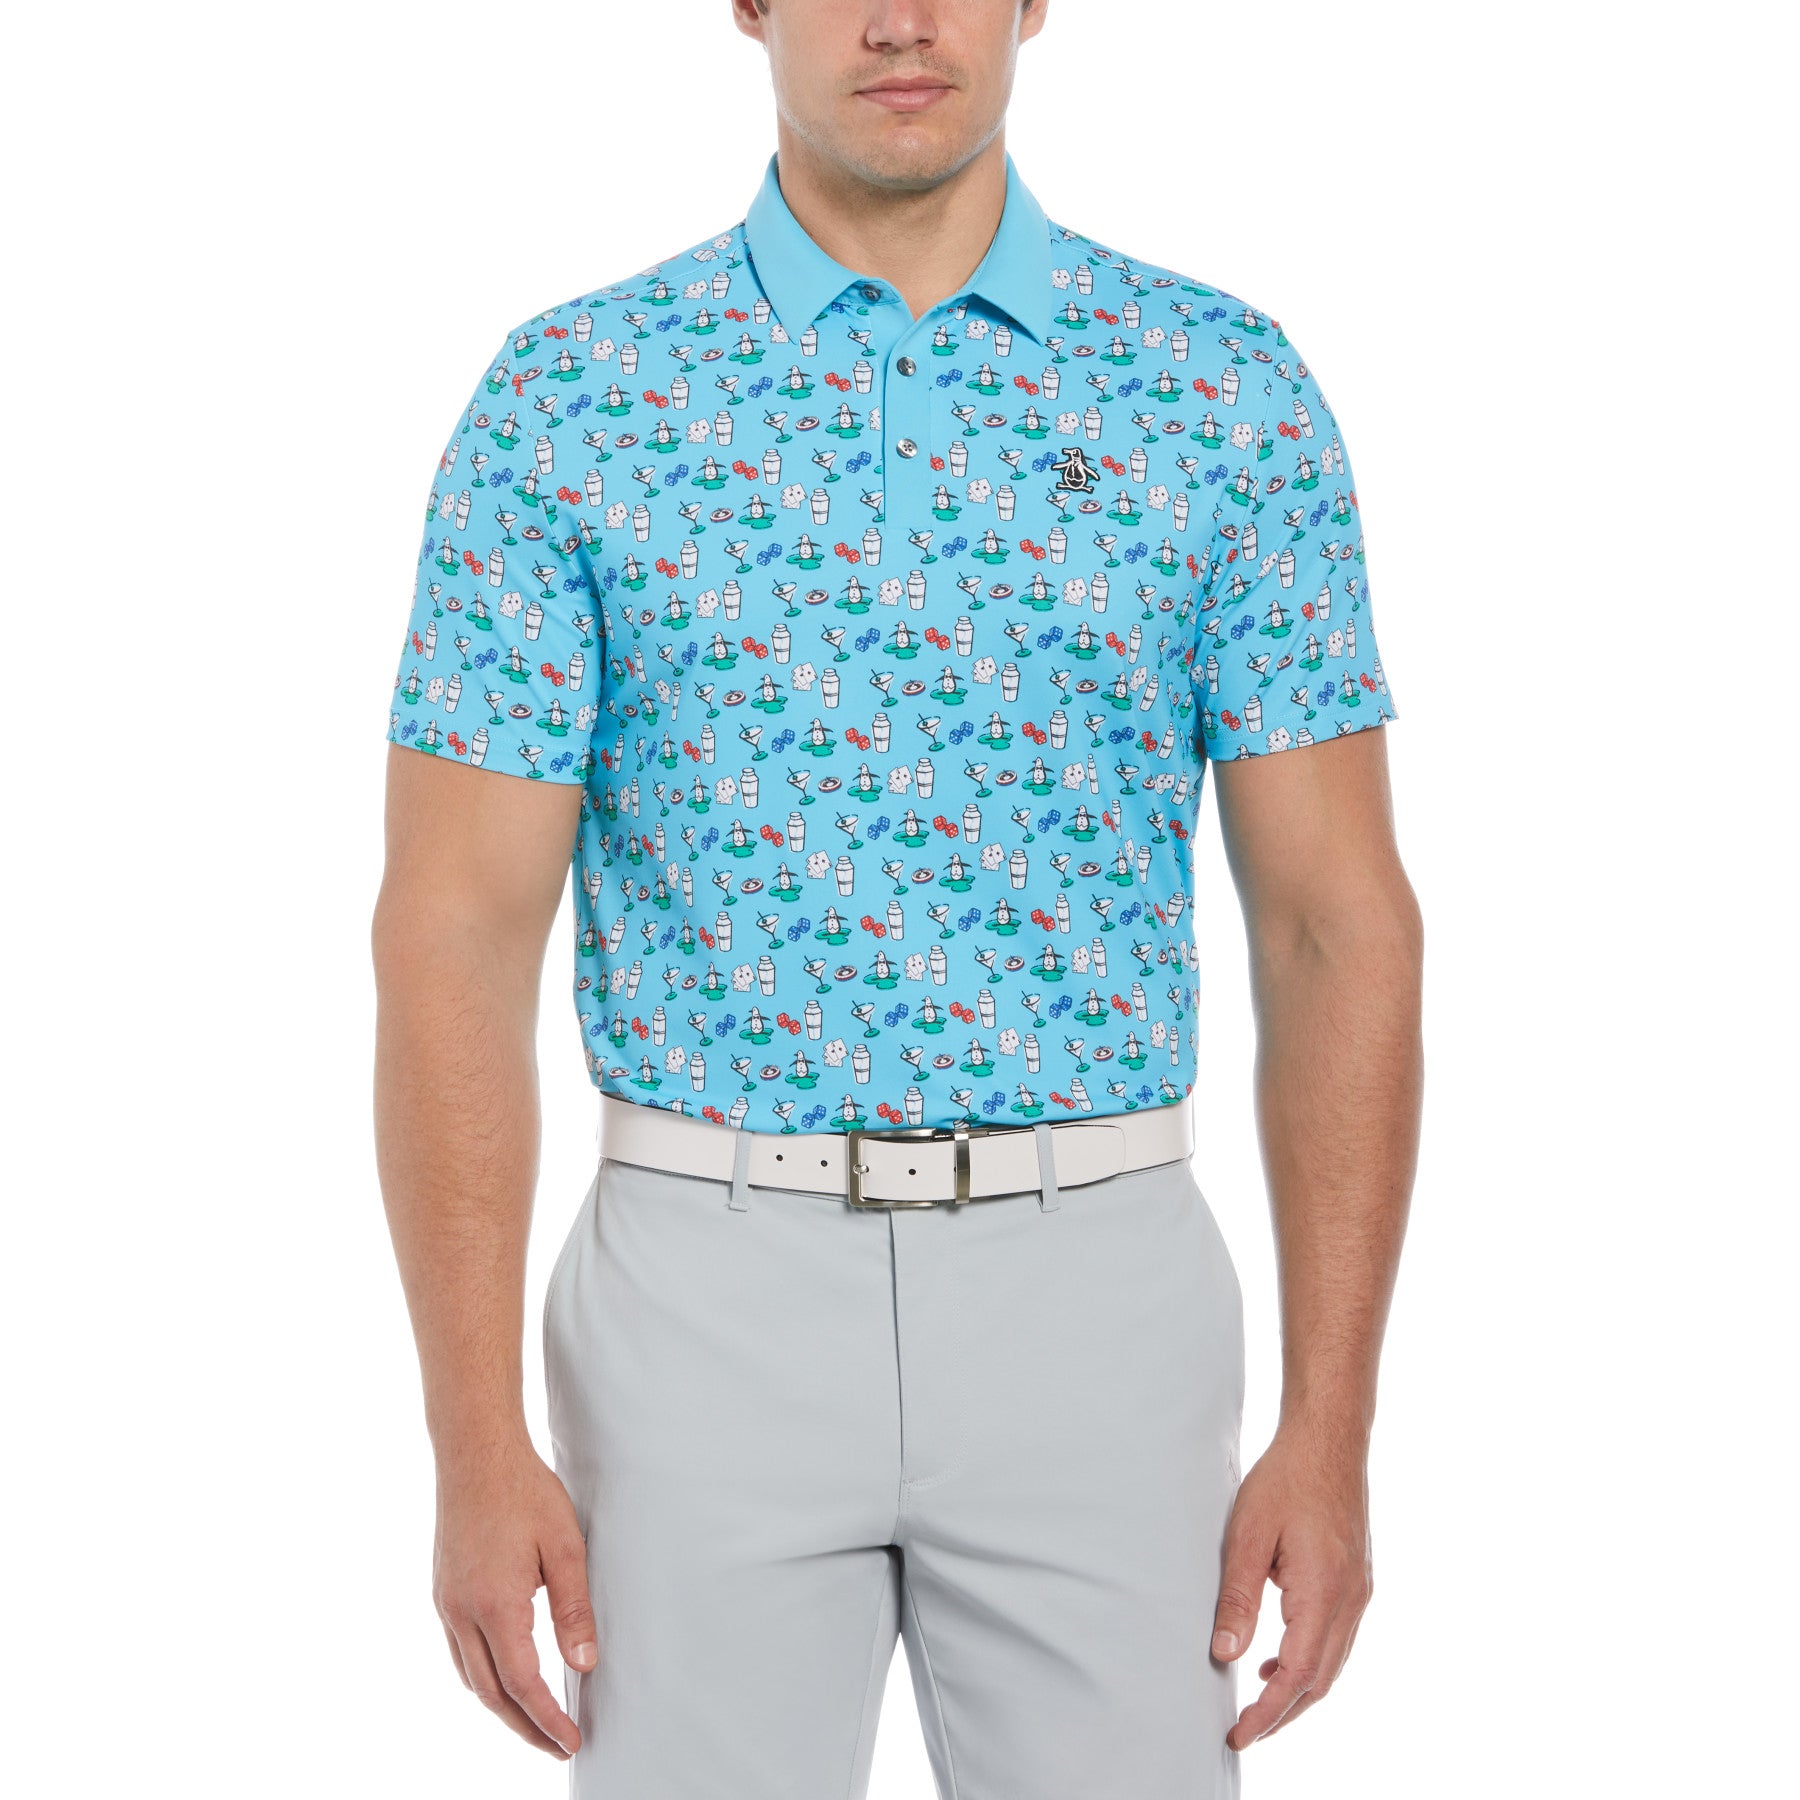 View Martini Print Golf Polo Shirt In Blue Atoll information